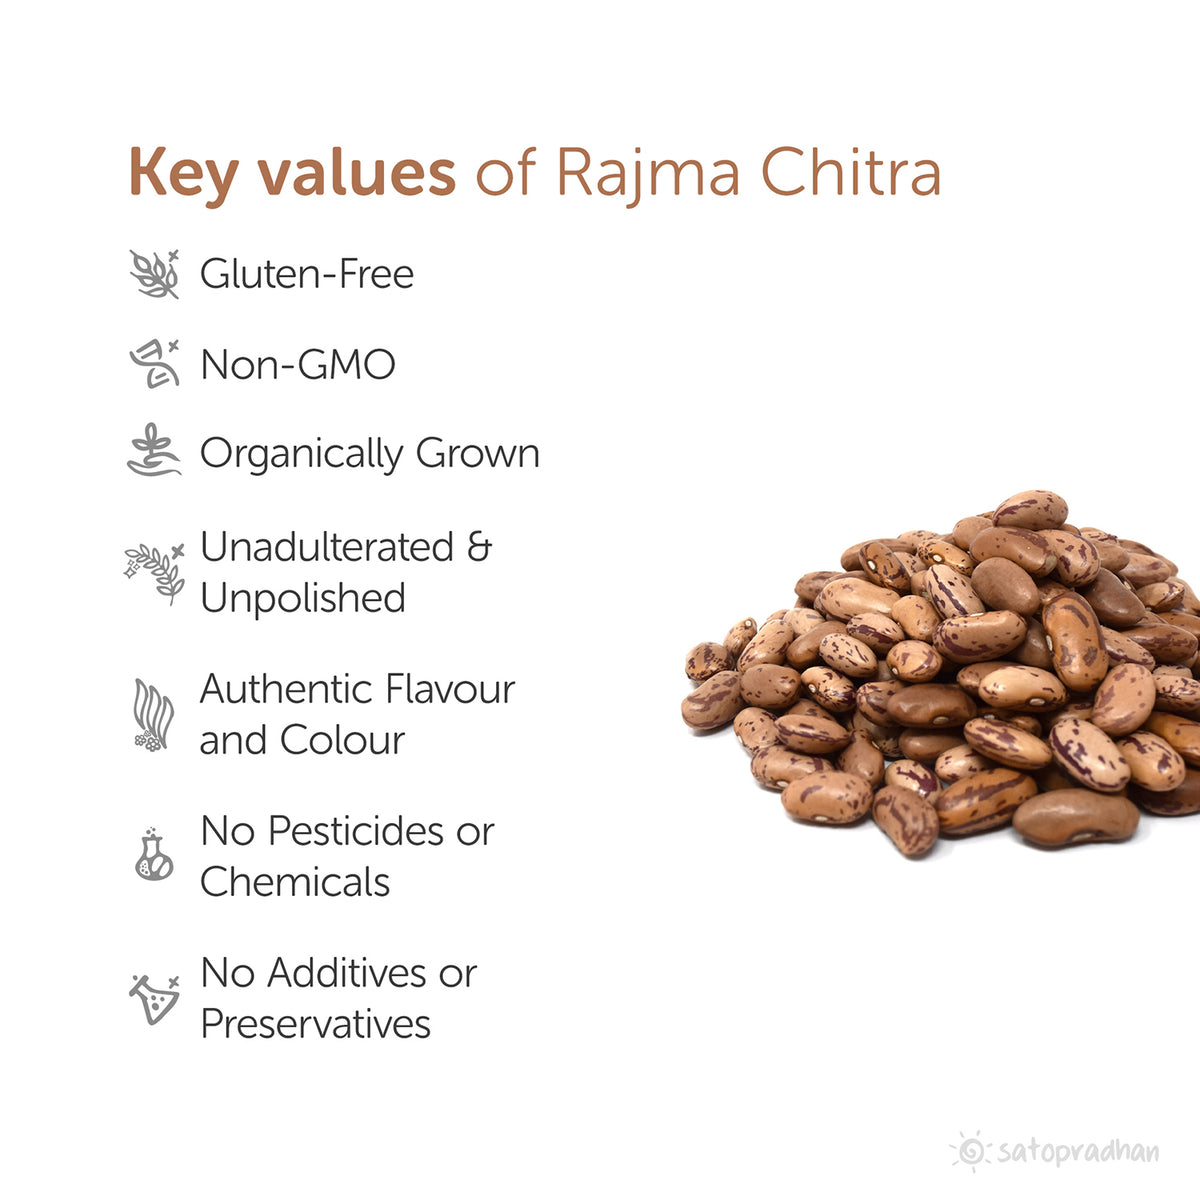 Rajma Chitra - Kidney Beans Chitra - Pinto Beans 800g - Organic, Raw, Unpolished & Wholesome - Choicest Quality without Additives